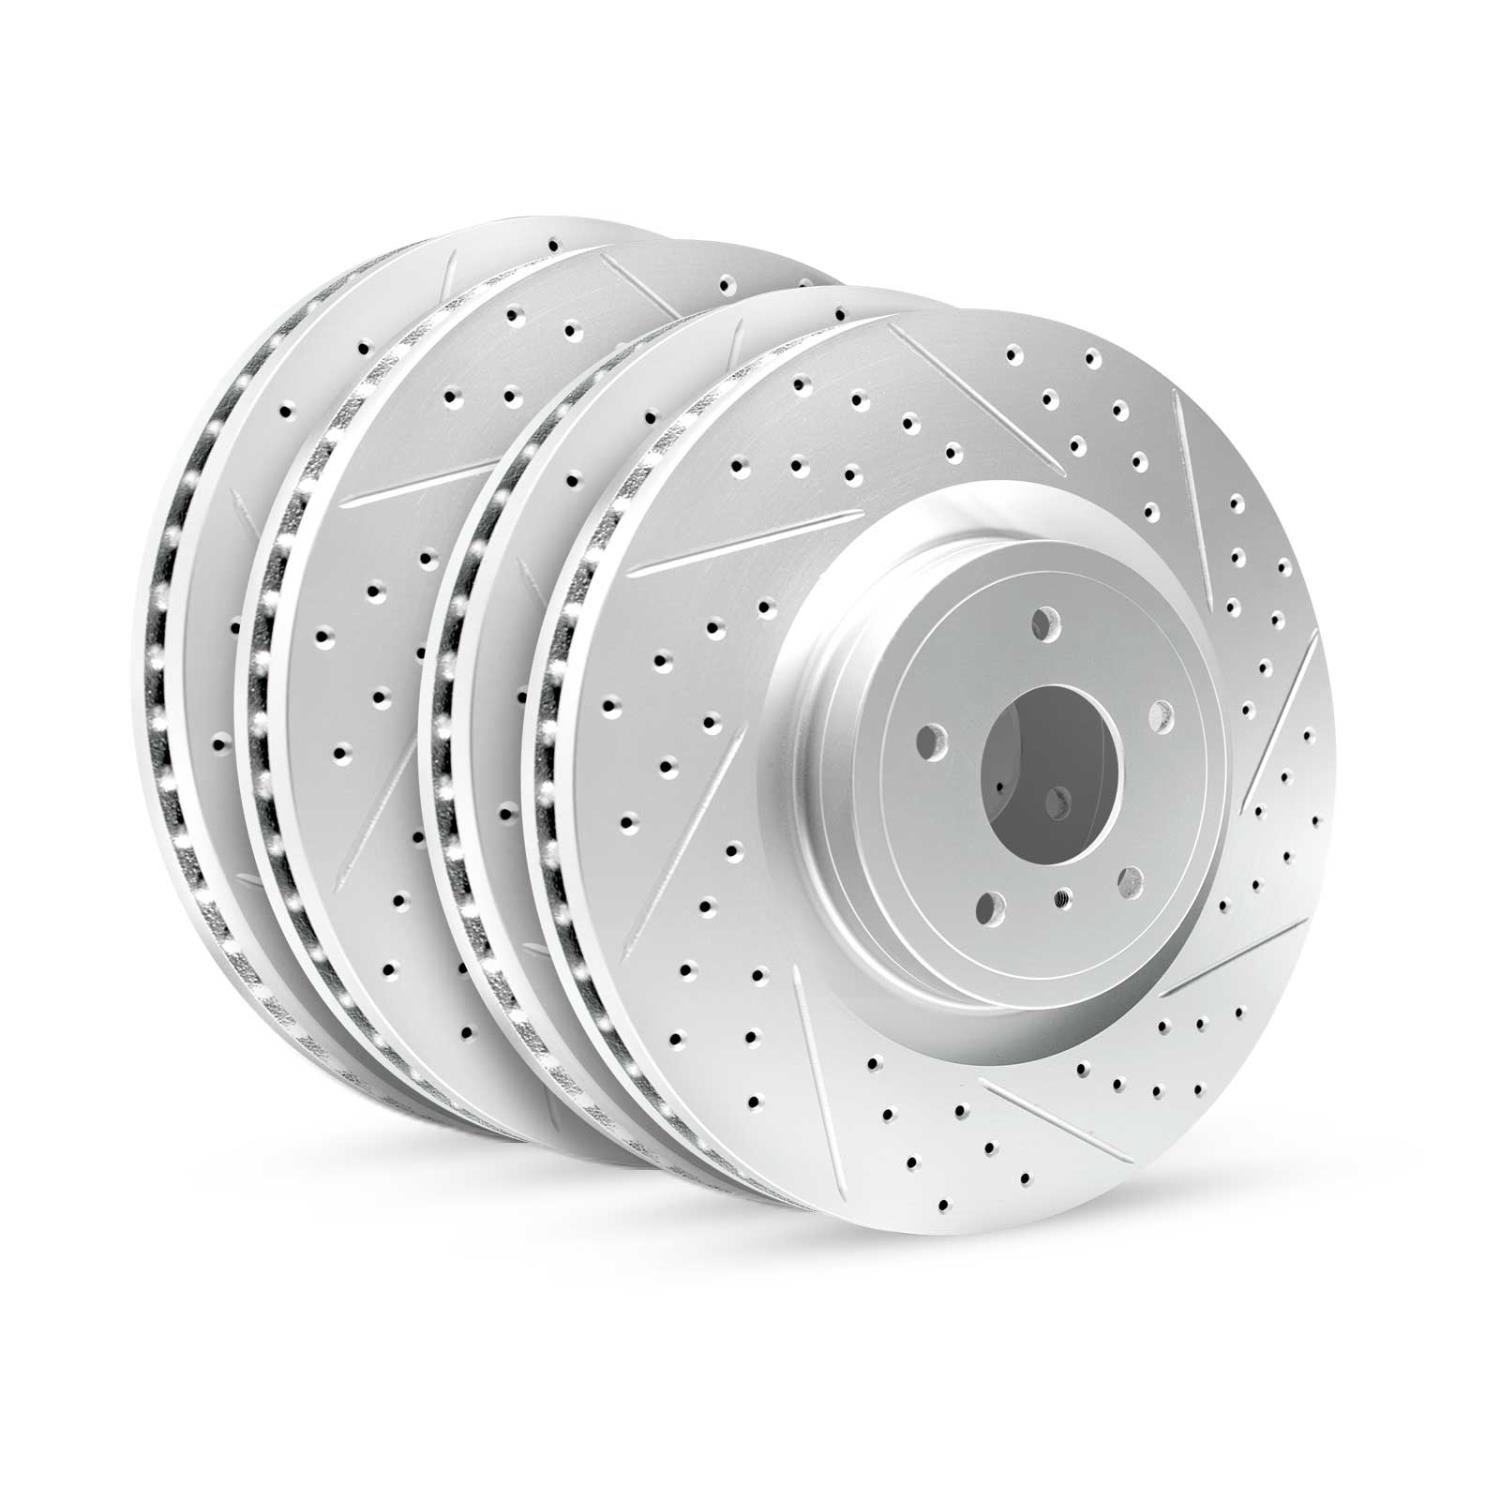 GEO-Carbon Drilled/Slotted Rotors, 2005-2010 Acura/Honda, Position: Front/Rear